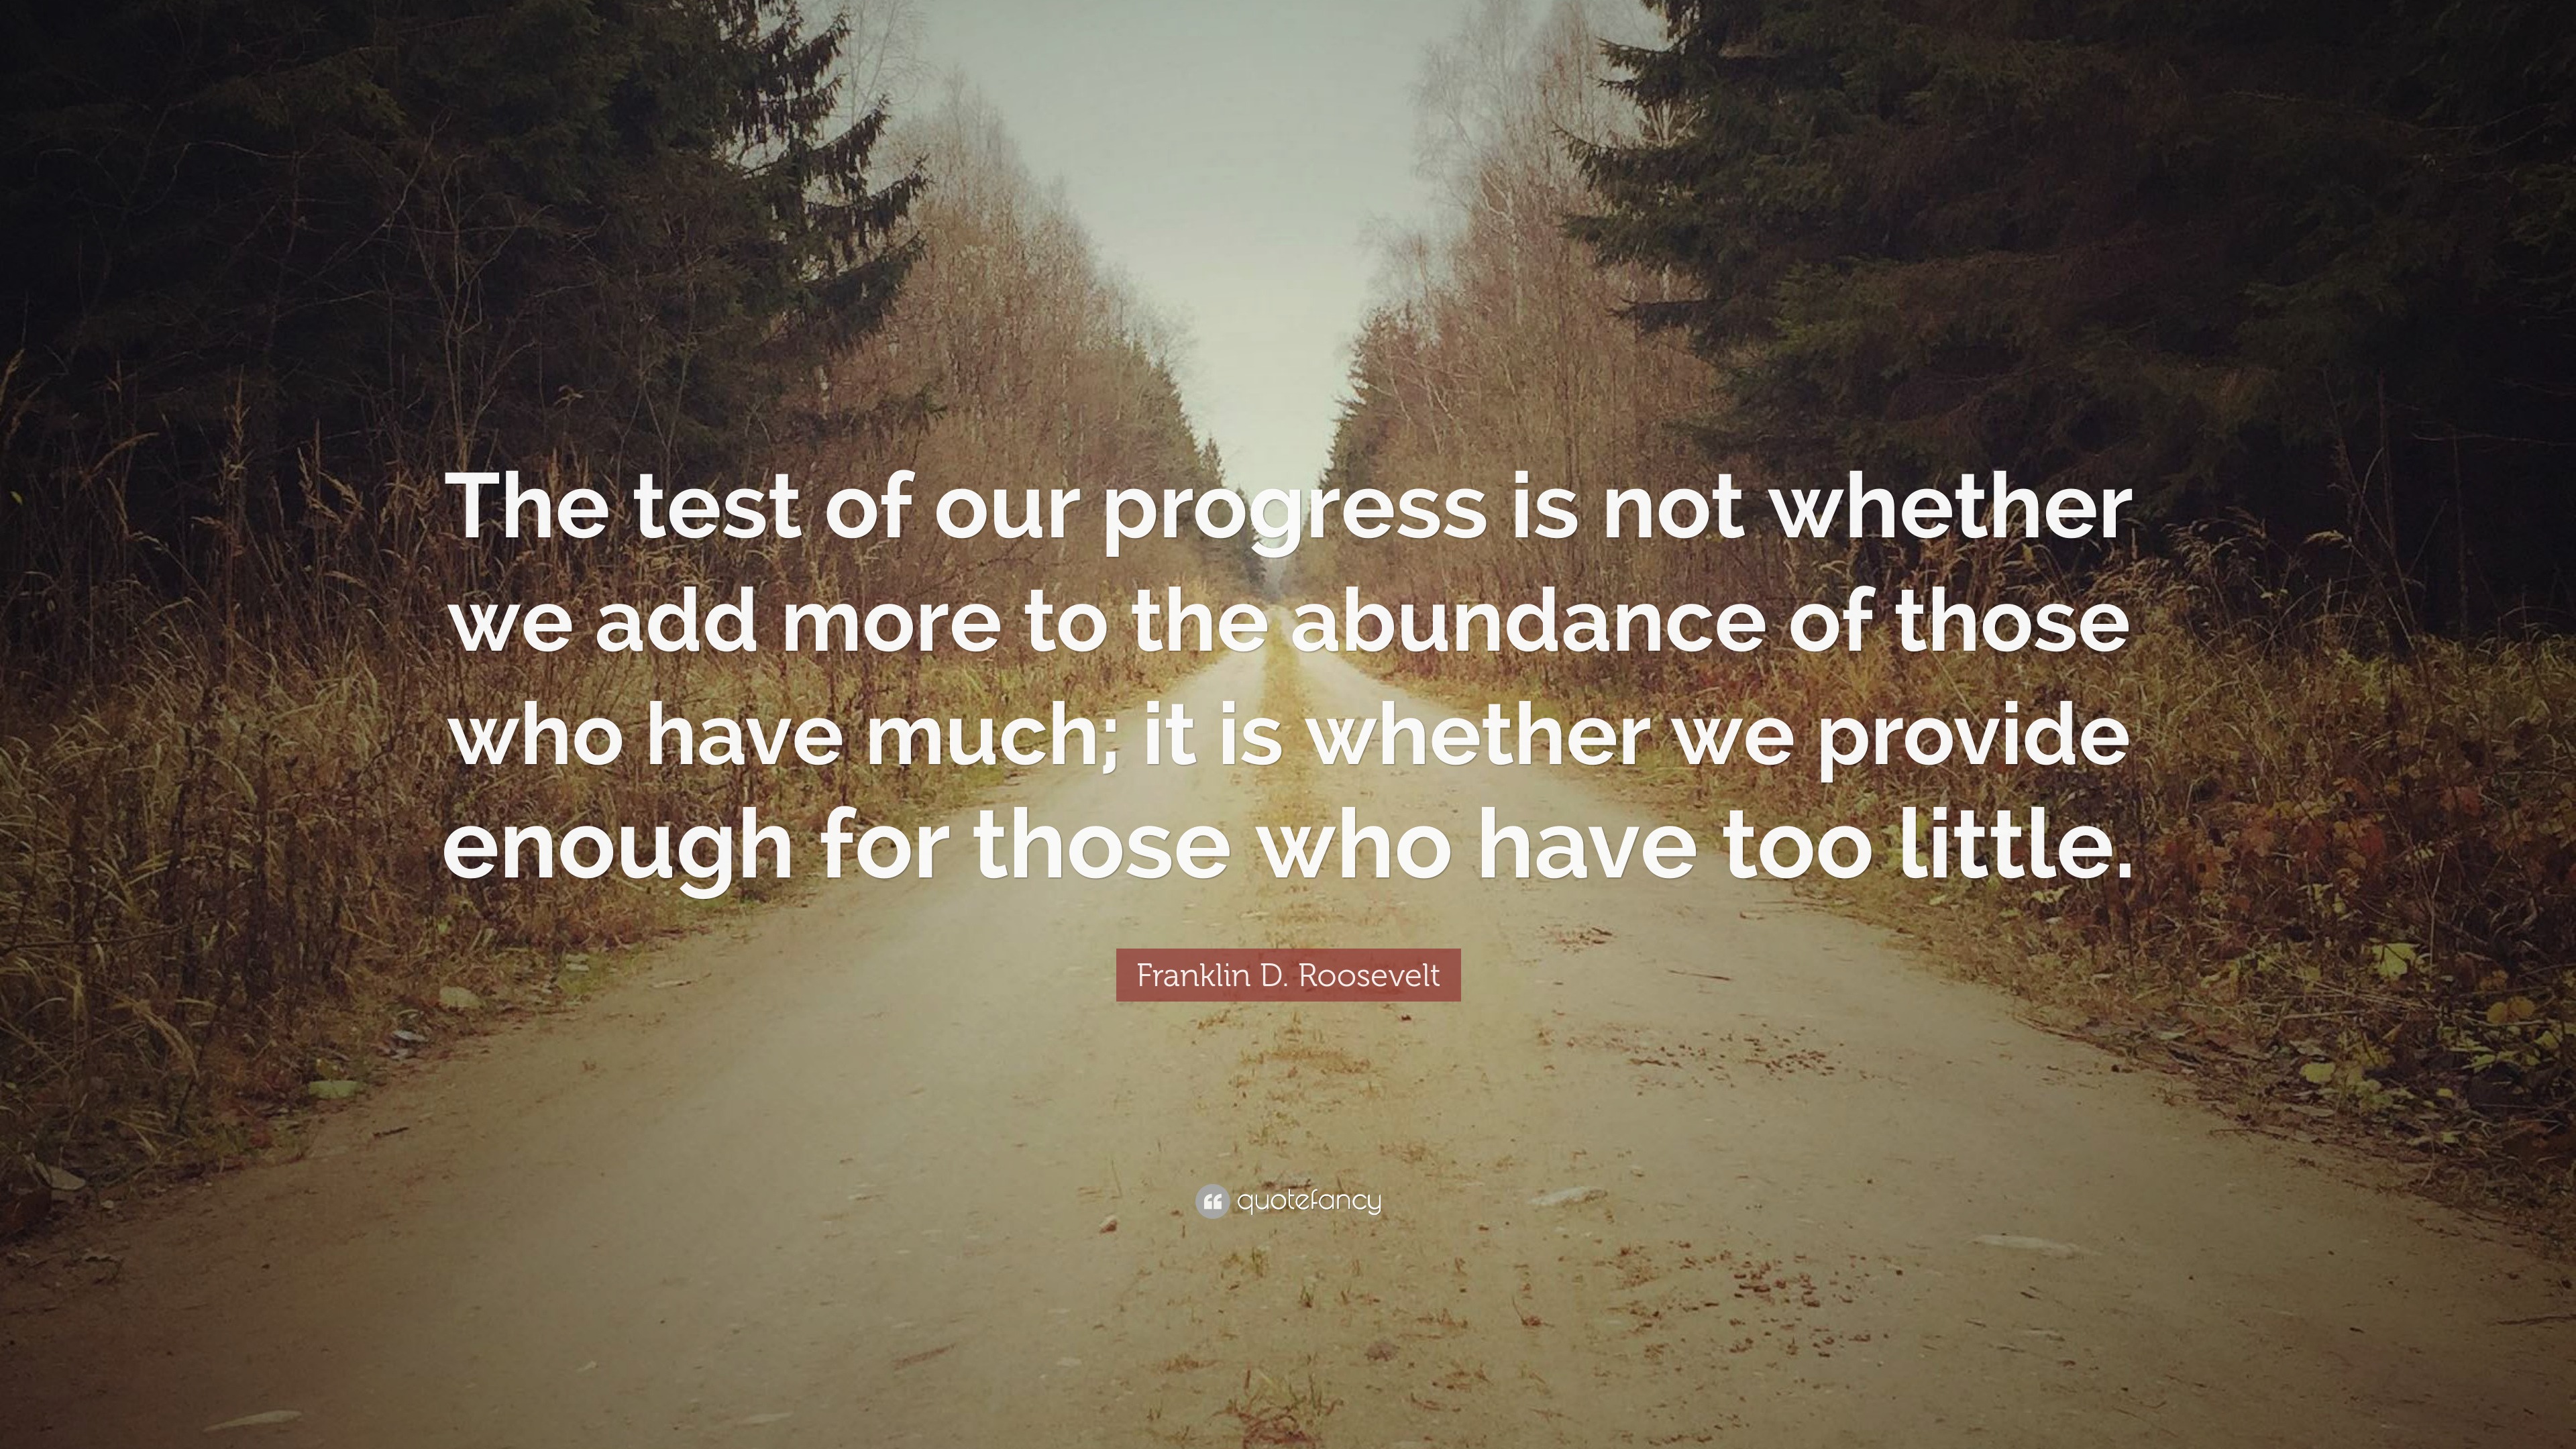 Franklin D. Roosevelt Quote: “The test of our progress is not whether ...